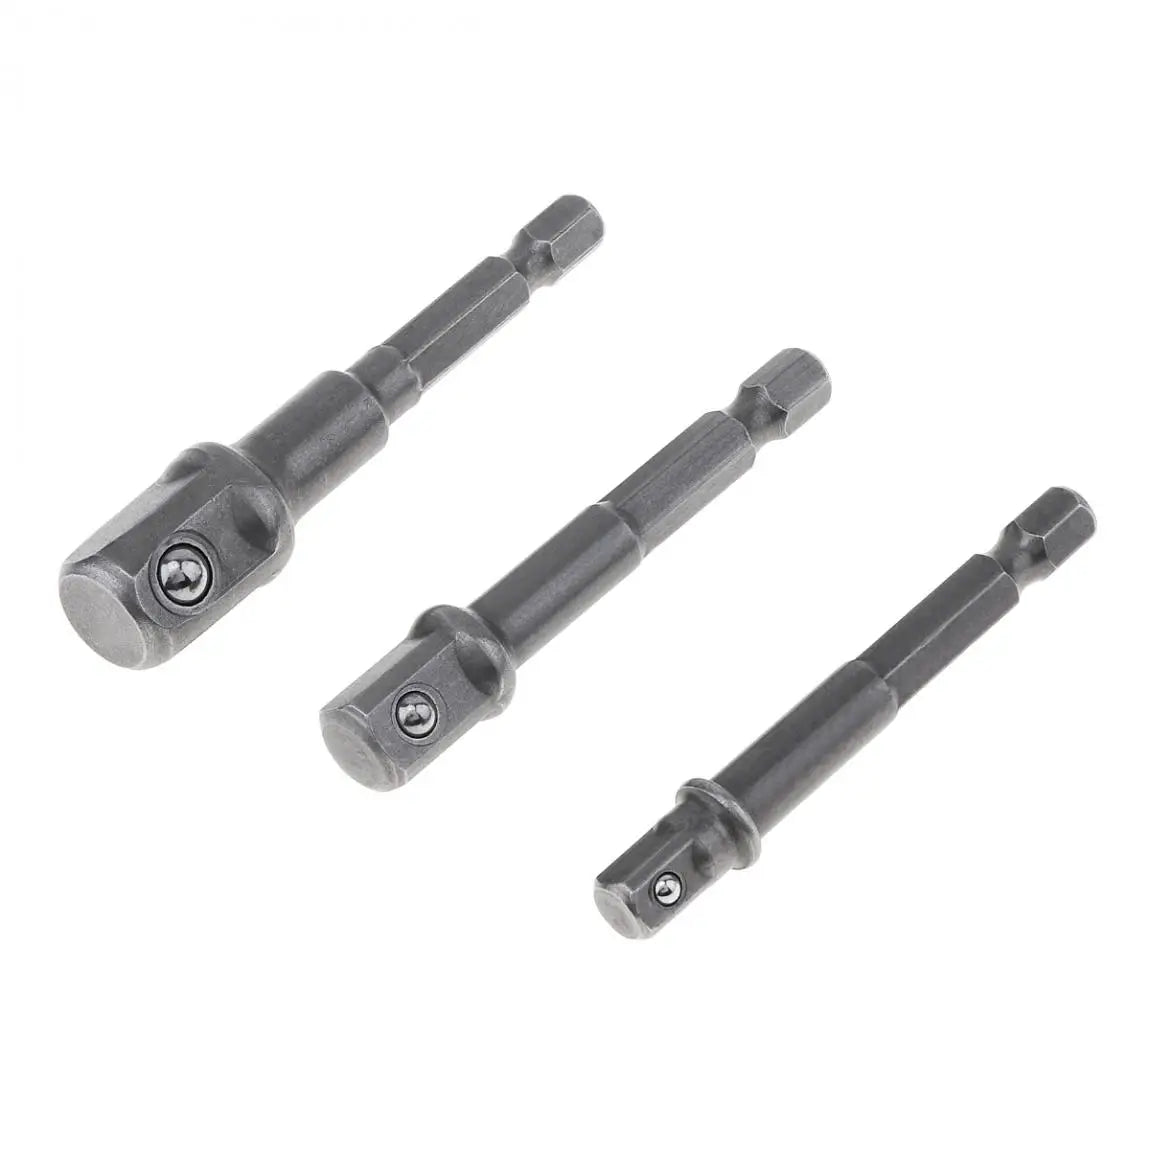 3pcs 1/4" 3/8" 1/2" Driver Adapter Nut Driver Sockets Impact Hex Shank Extension